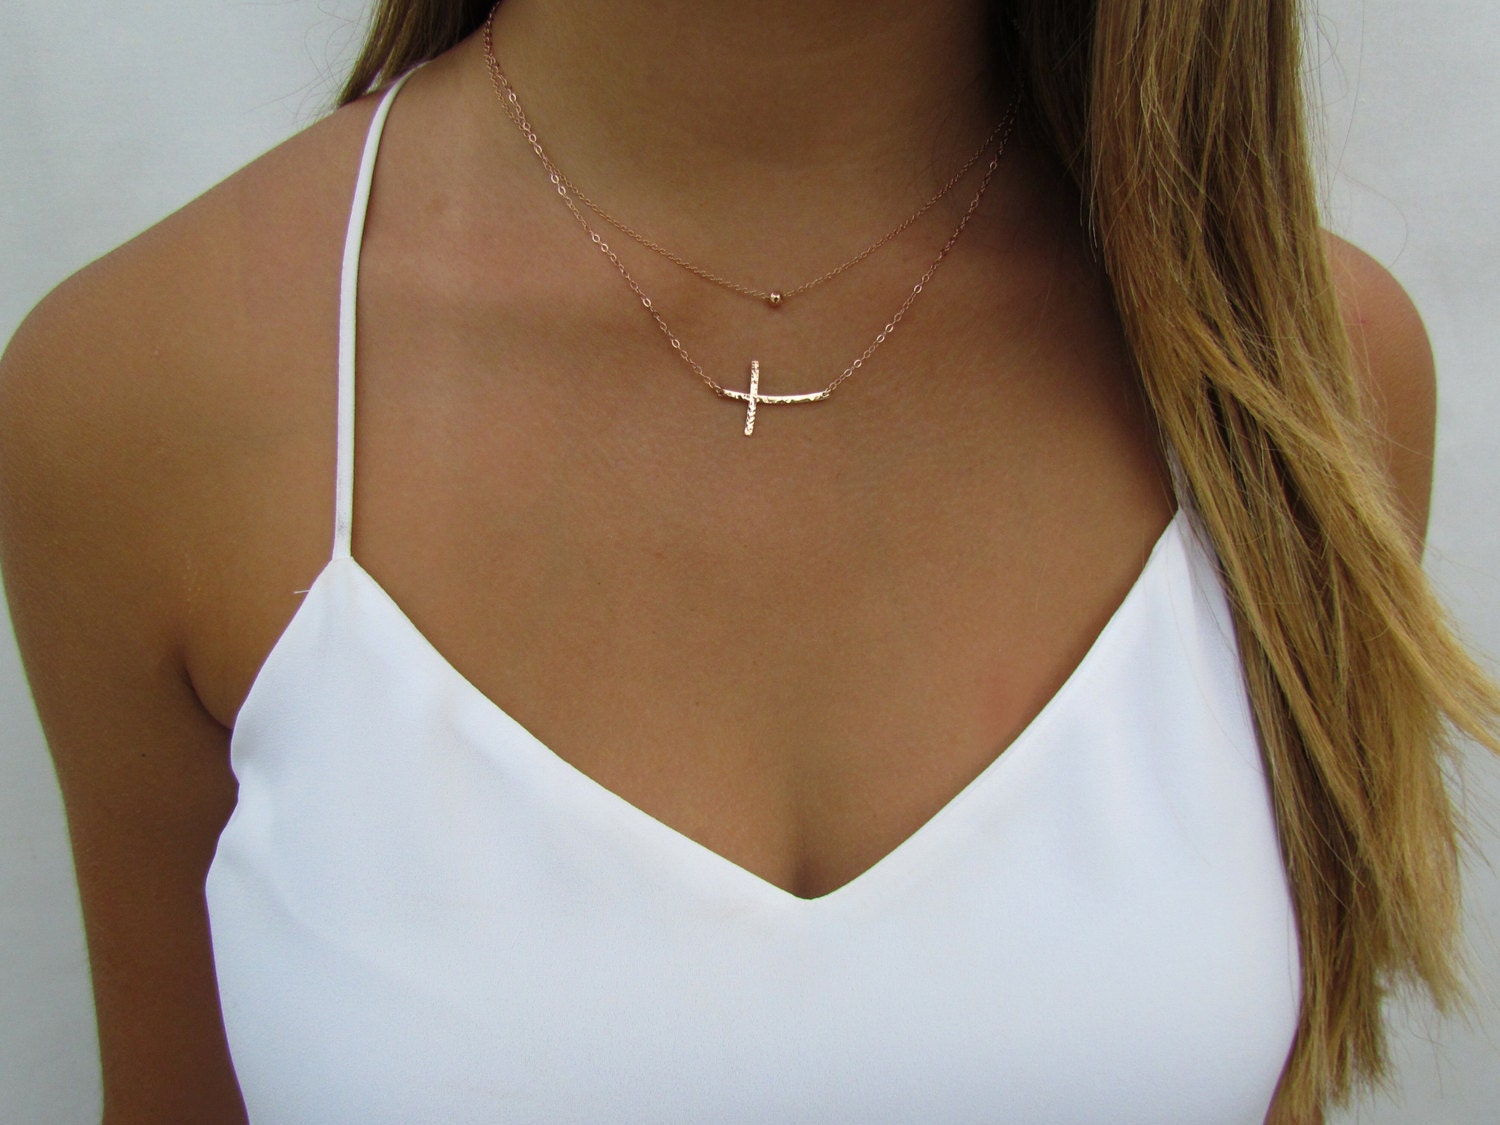 TINGN Layered Cross Necklace for Women Stainless Steel Gold Silver Black  Rose Gold Paperclip Chain Layering Cross Pendant Cross Necklace for Women 